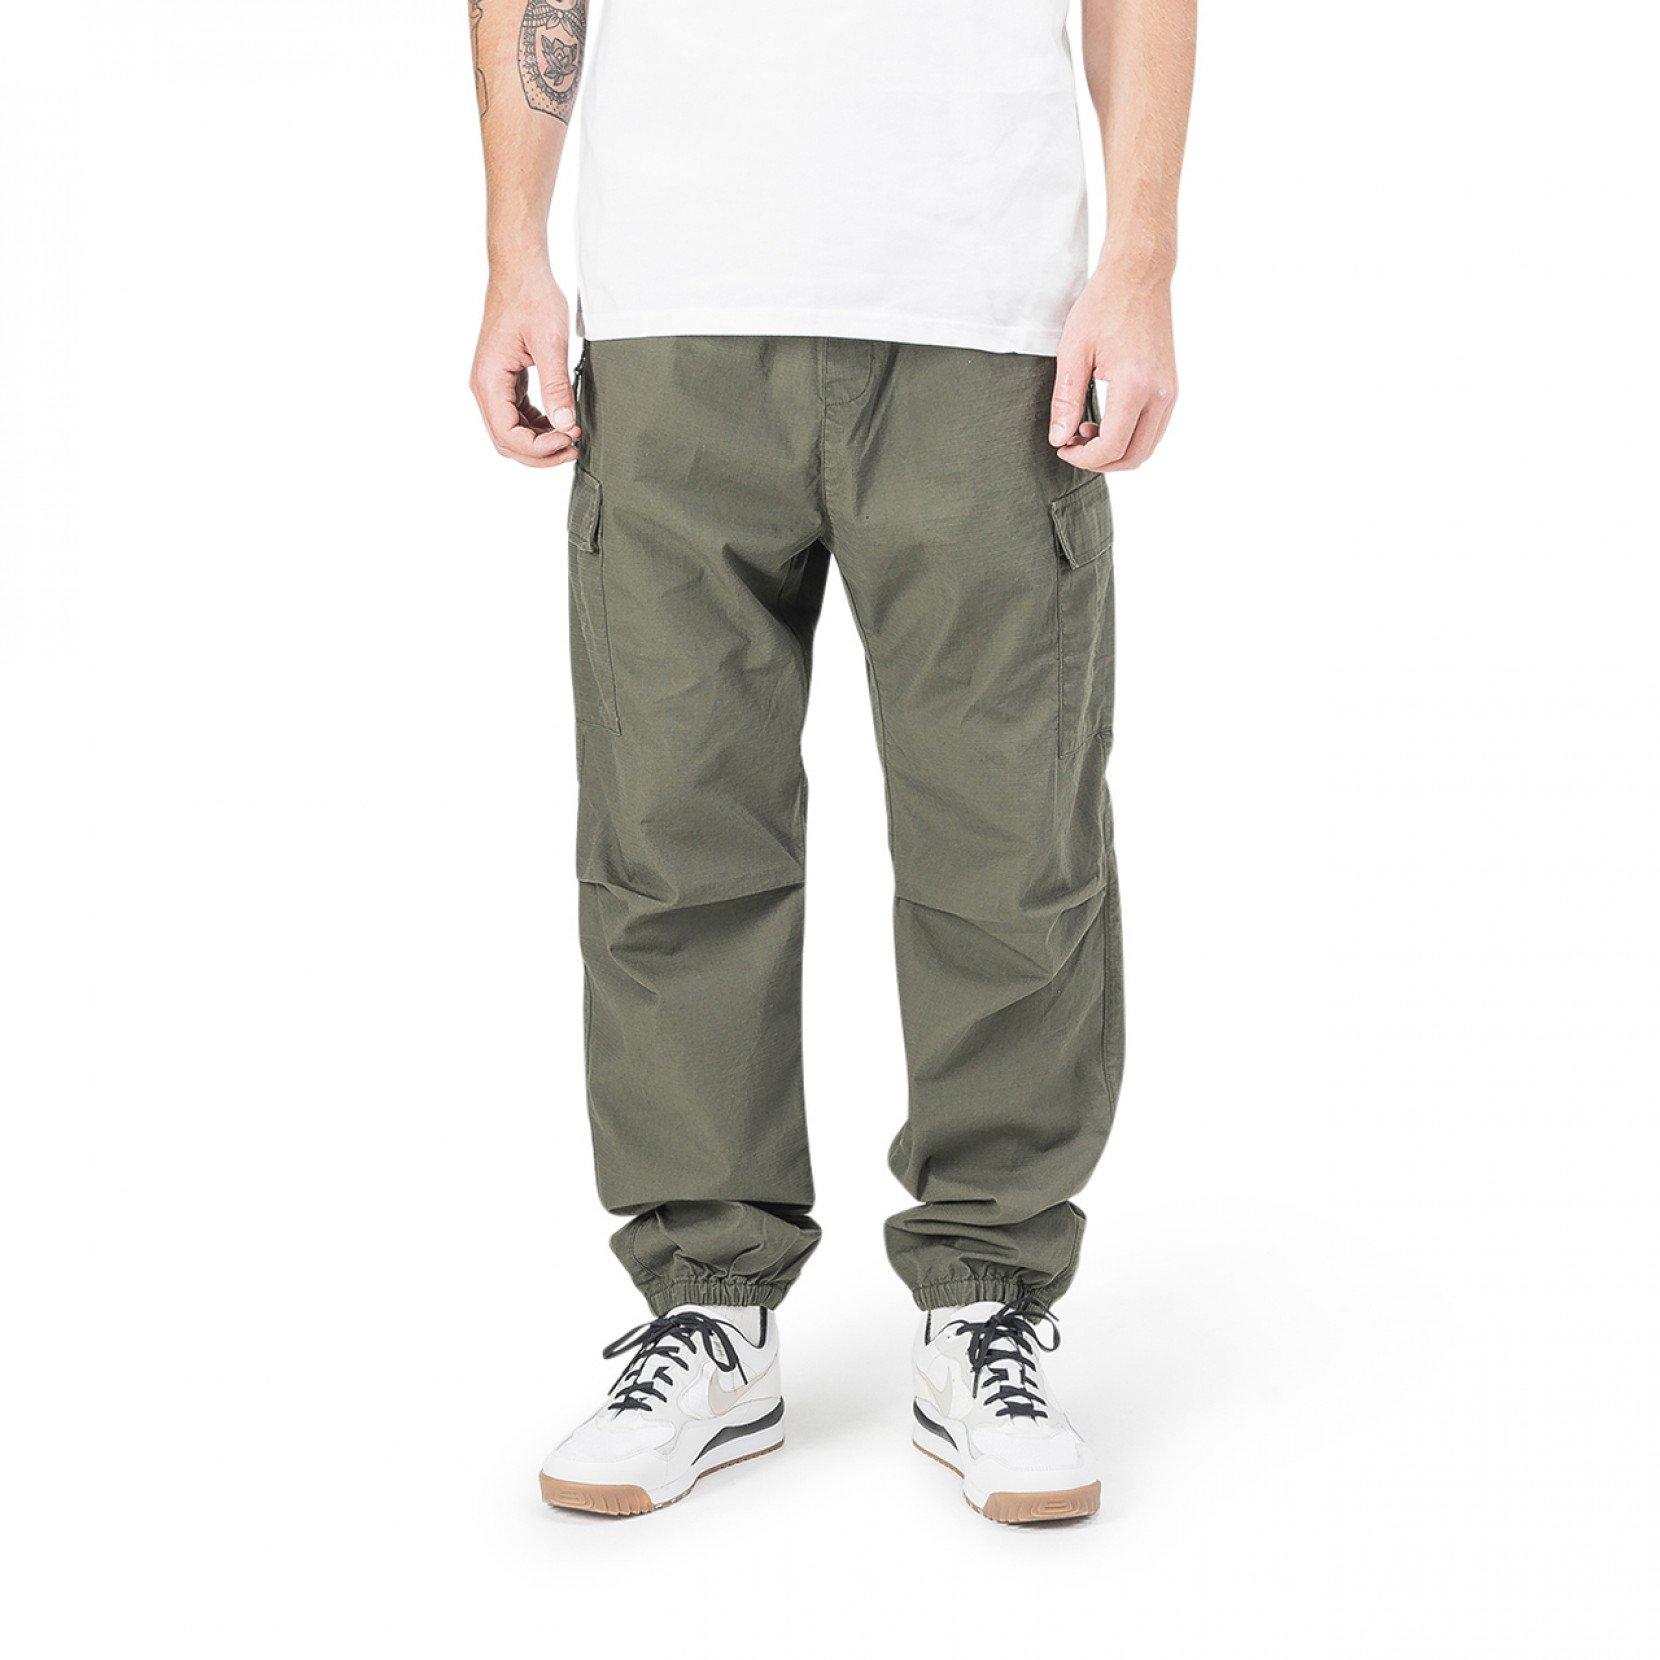 Carhartt WIP Cotton Cargo Jogger in Olive (Green) for Men - Lyst